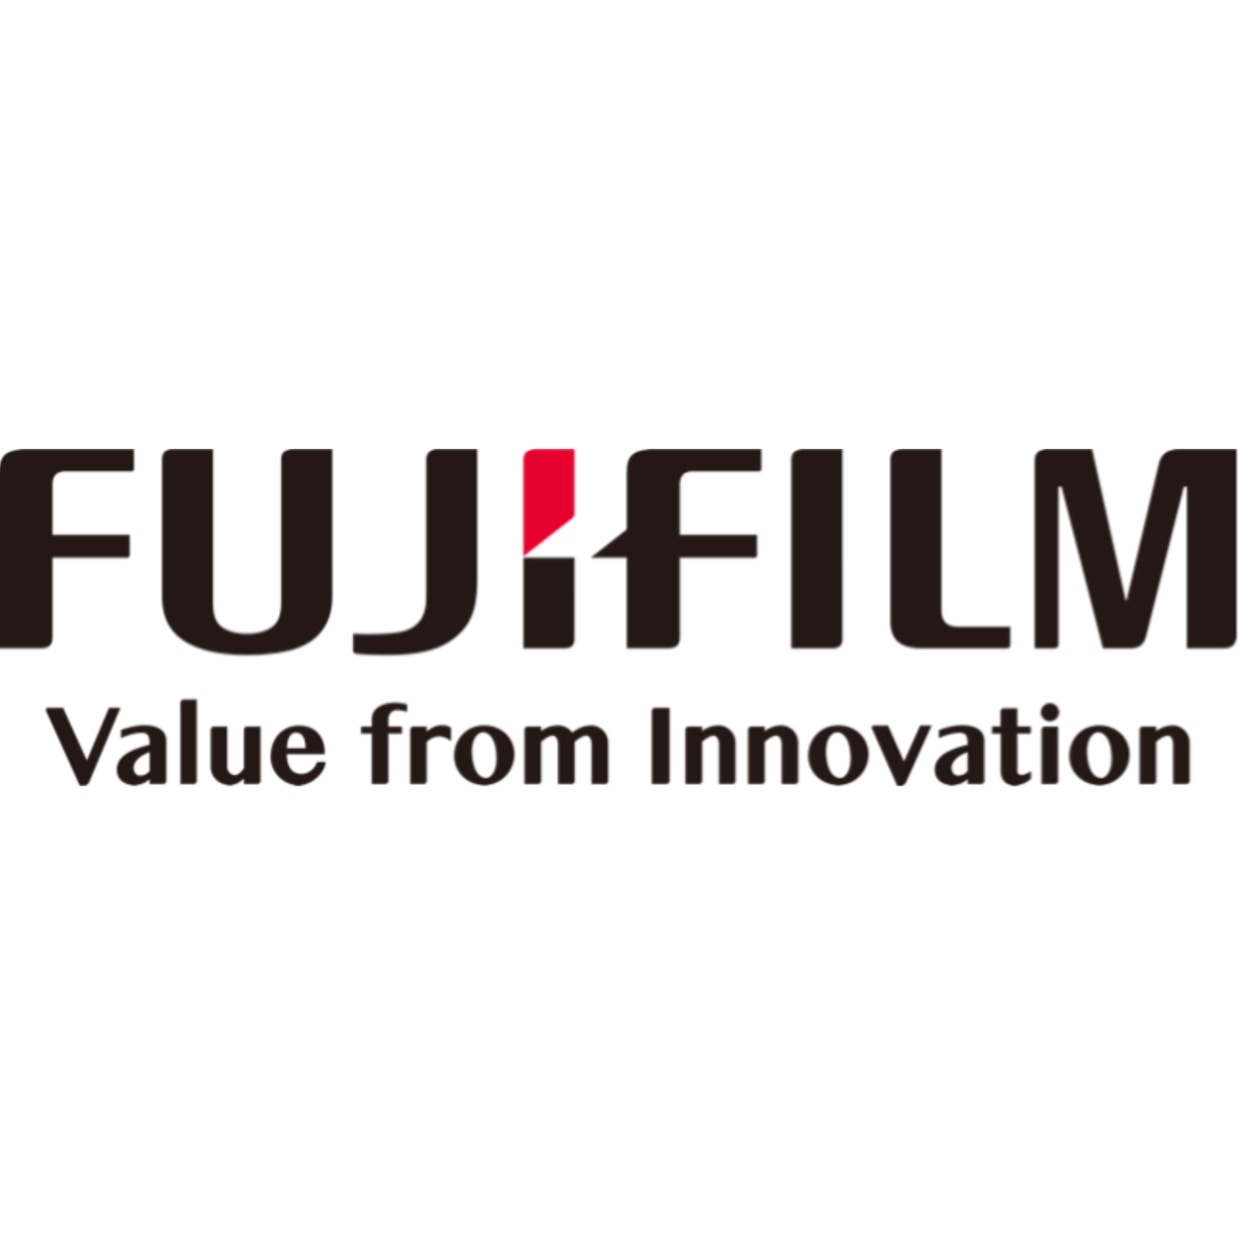 Imaging Partner Fujifilm Since its founding in 1934, the Fujifilm Group has continued to be a leading company in the...